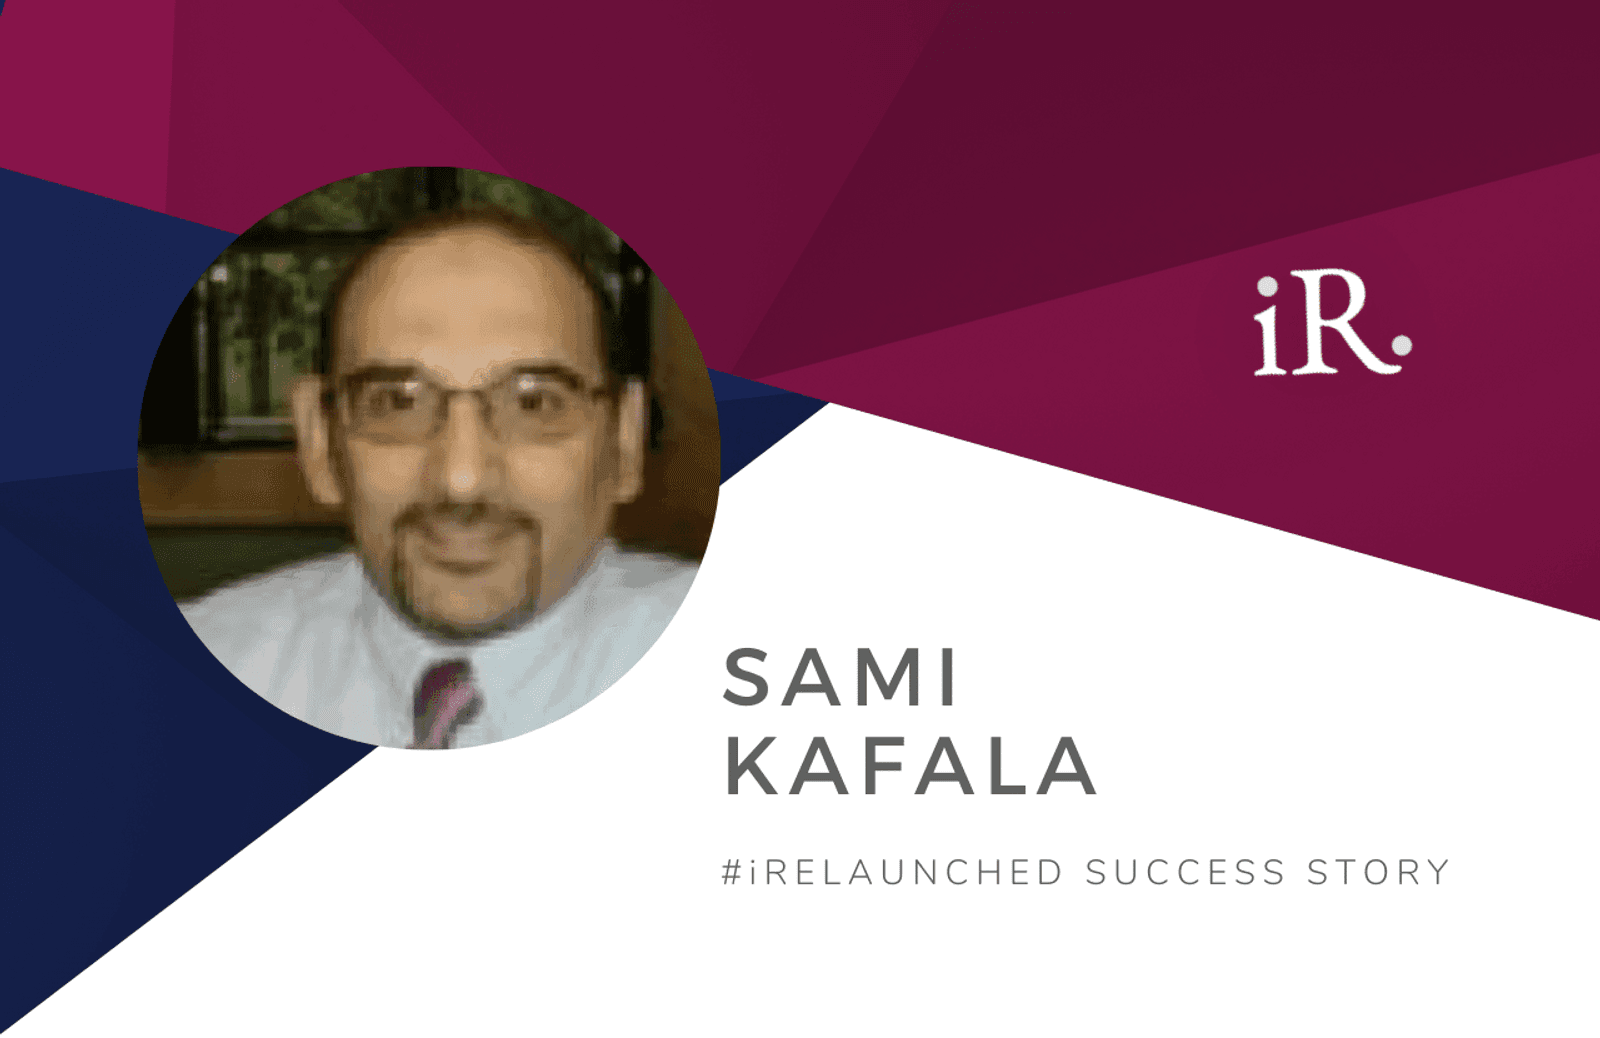 Sami Kafala's headshot and the text #iRelaunched Success Story along with the iRelaunch logo.  A navy and maroon geometric textured background intersect behind Sami's headshot.